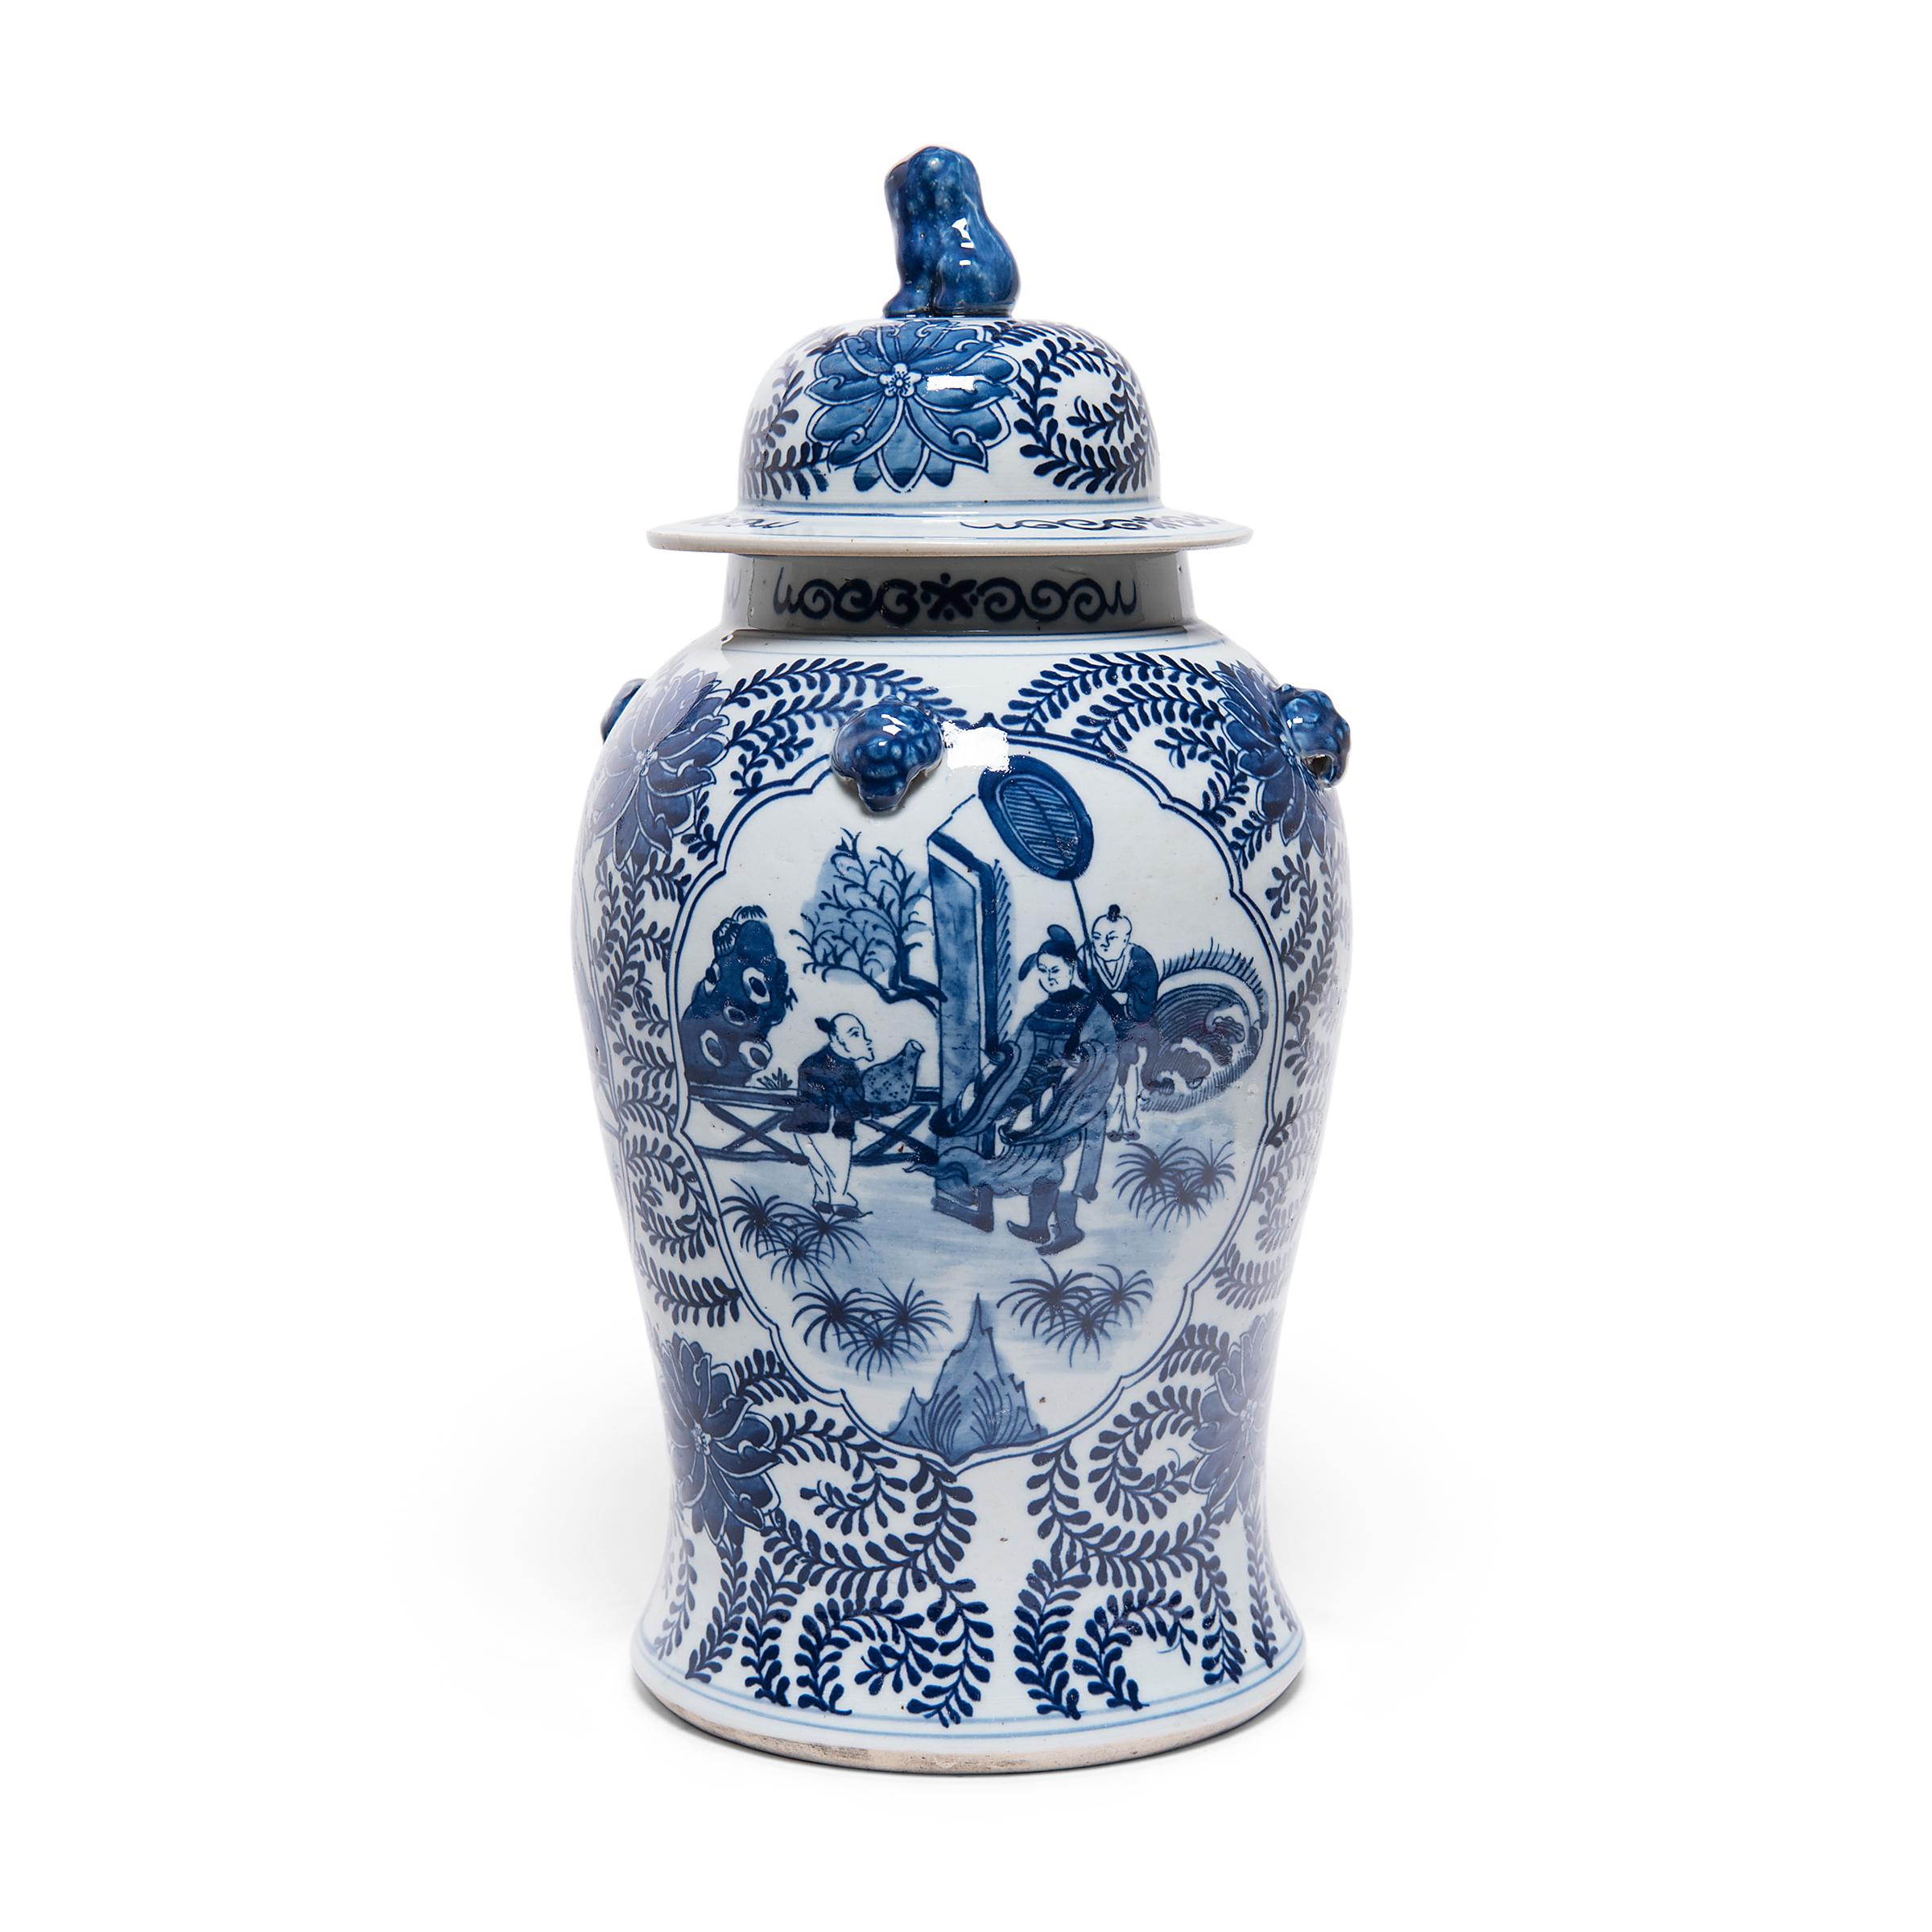 Glazed Pair of Chinese Blue and White Garden Baluster Jars